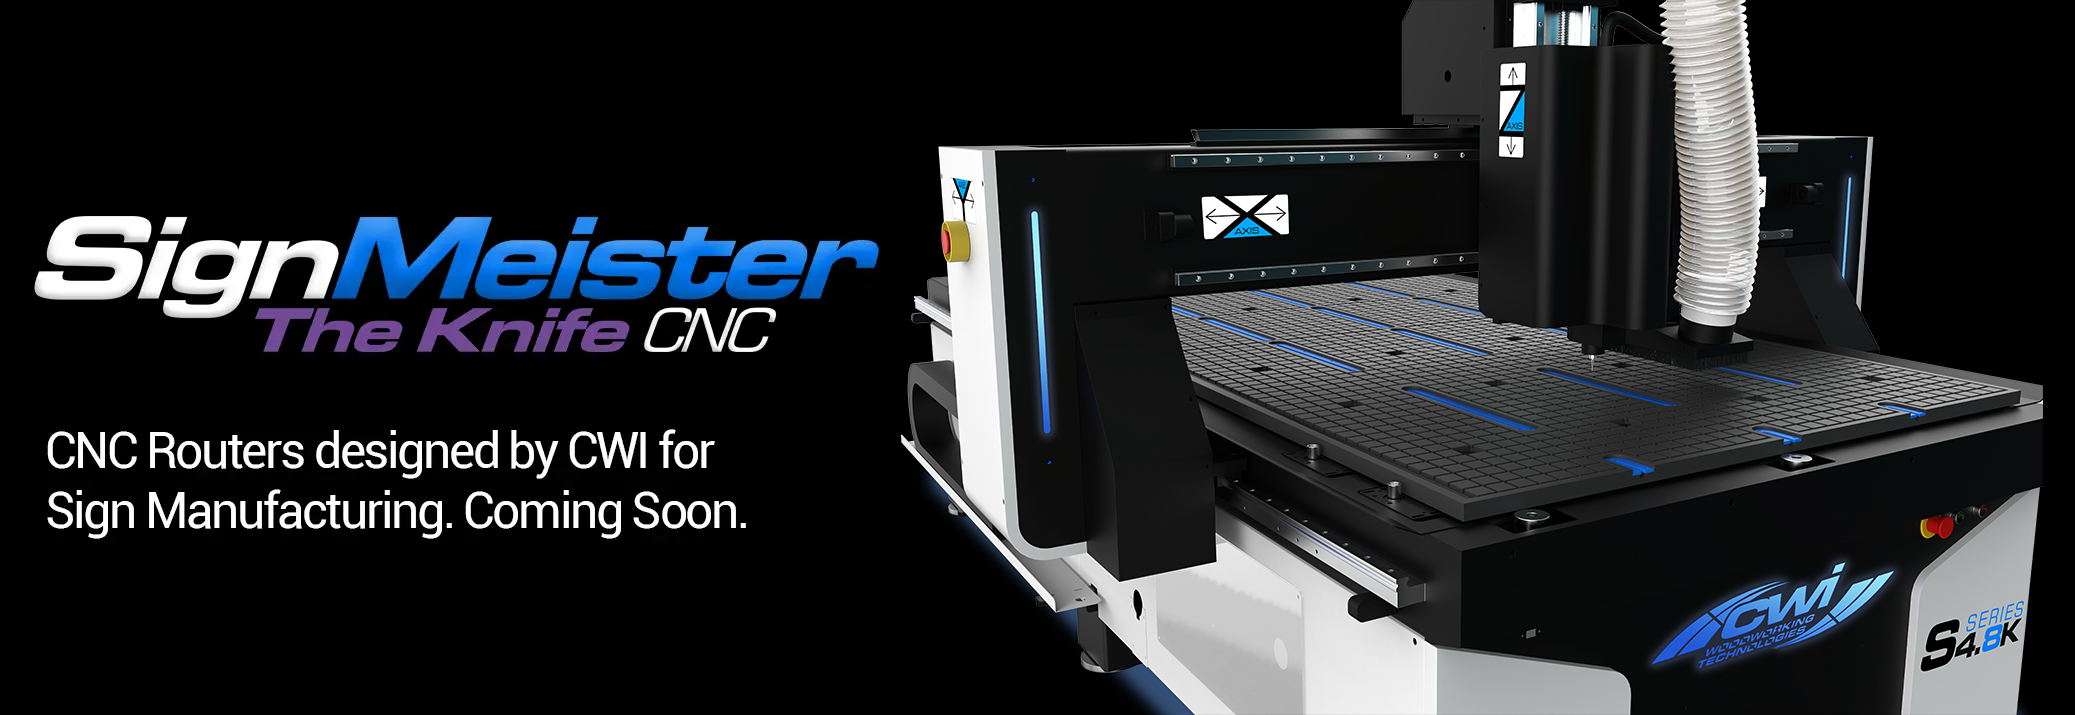 SignMeister CNC Routers